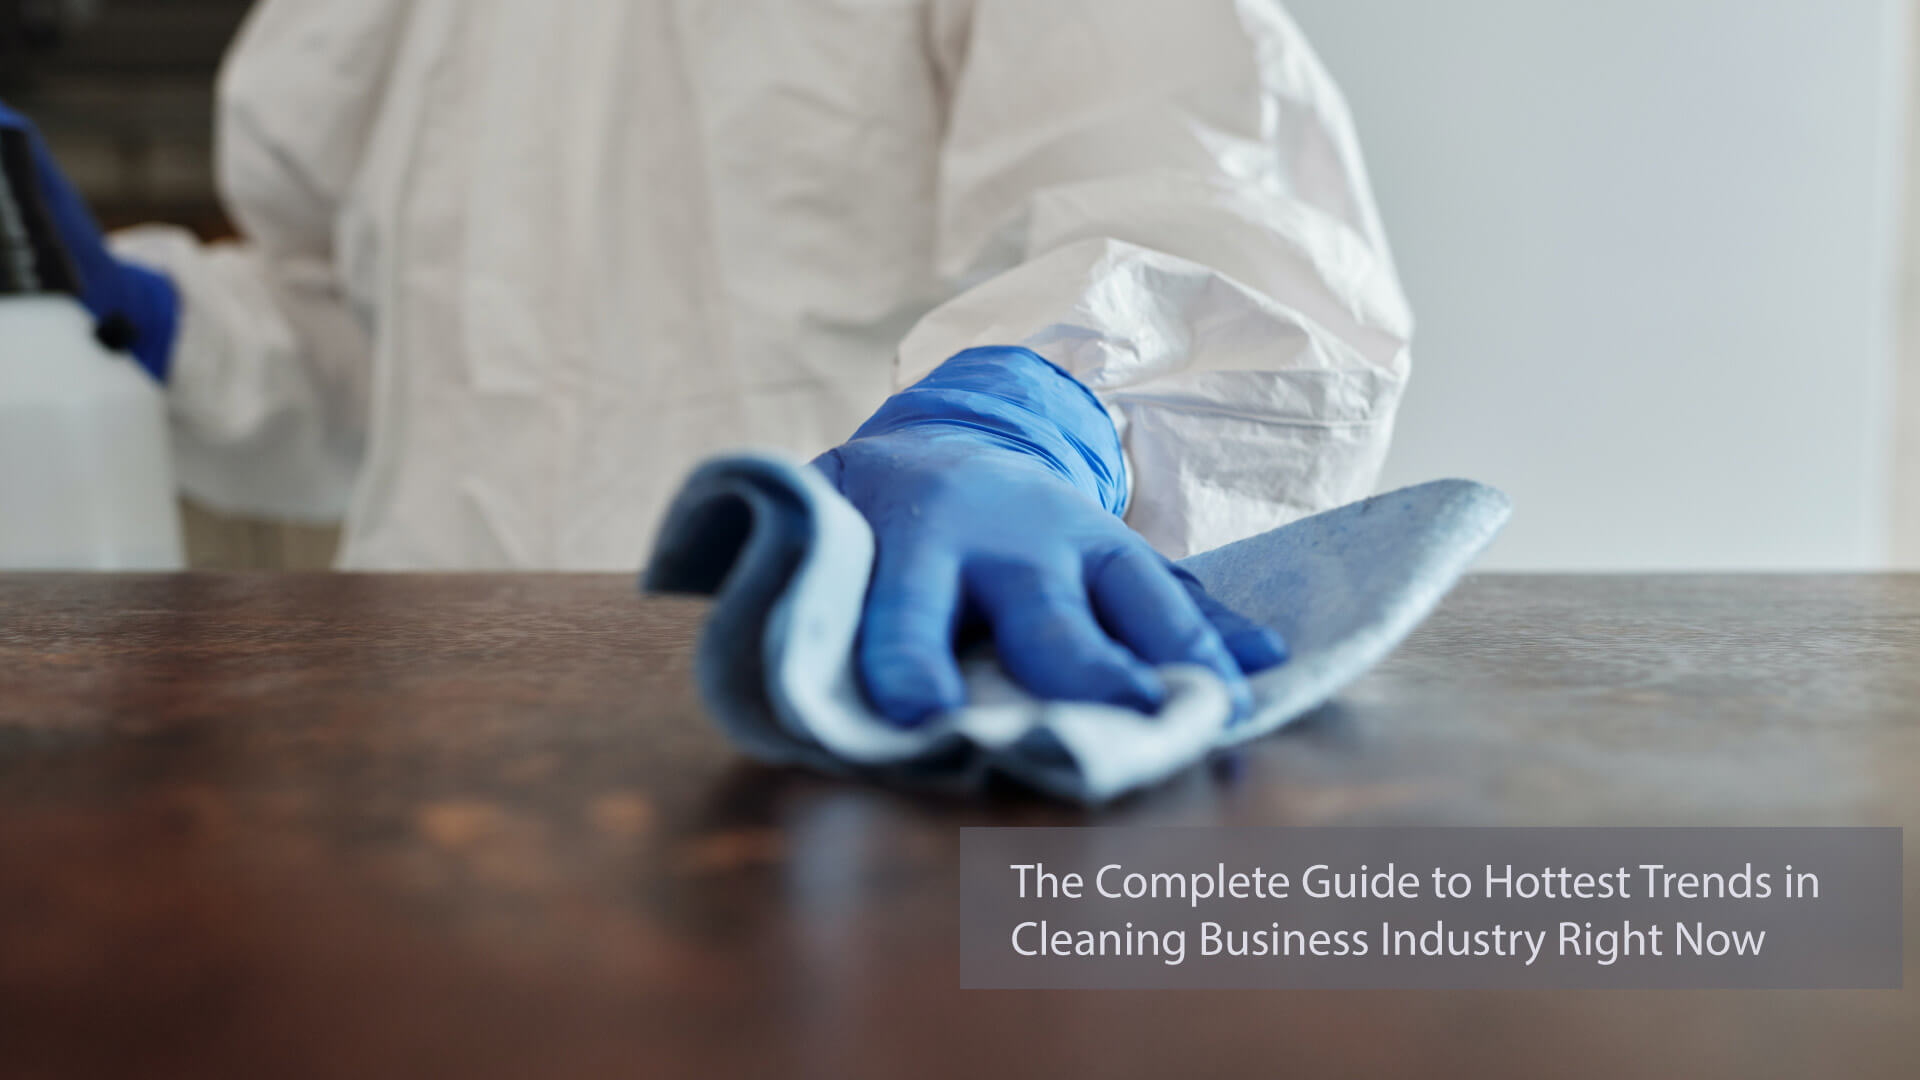 Cleaning industry